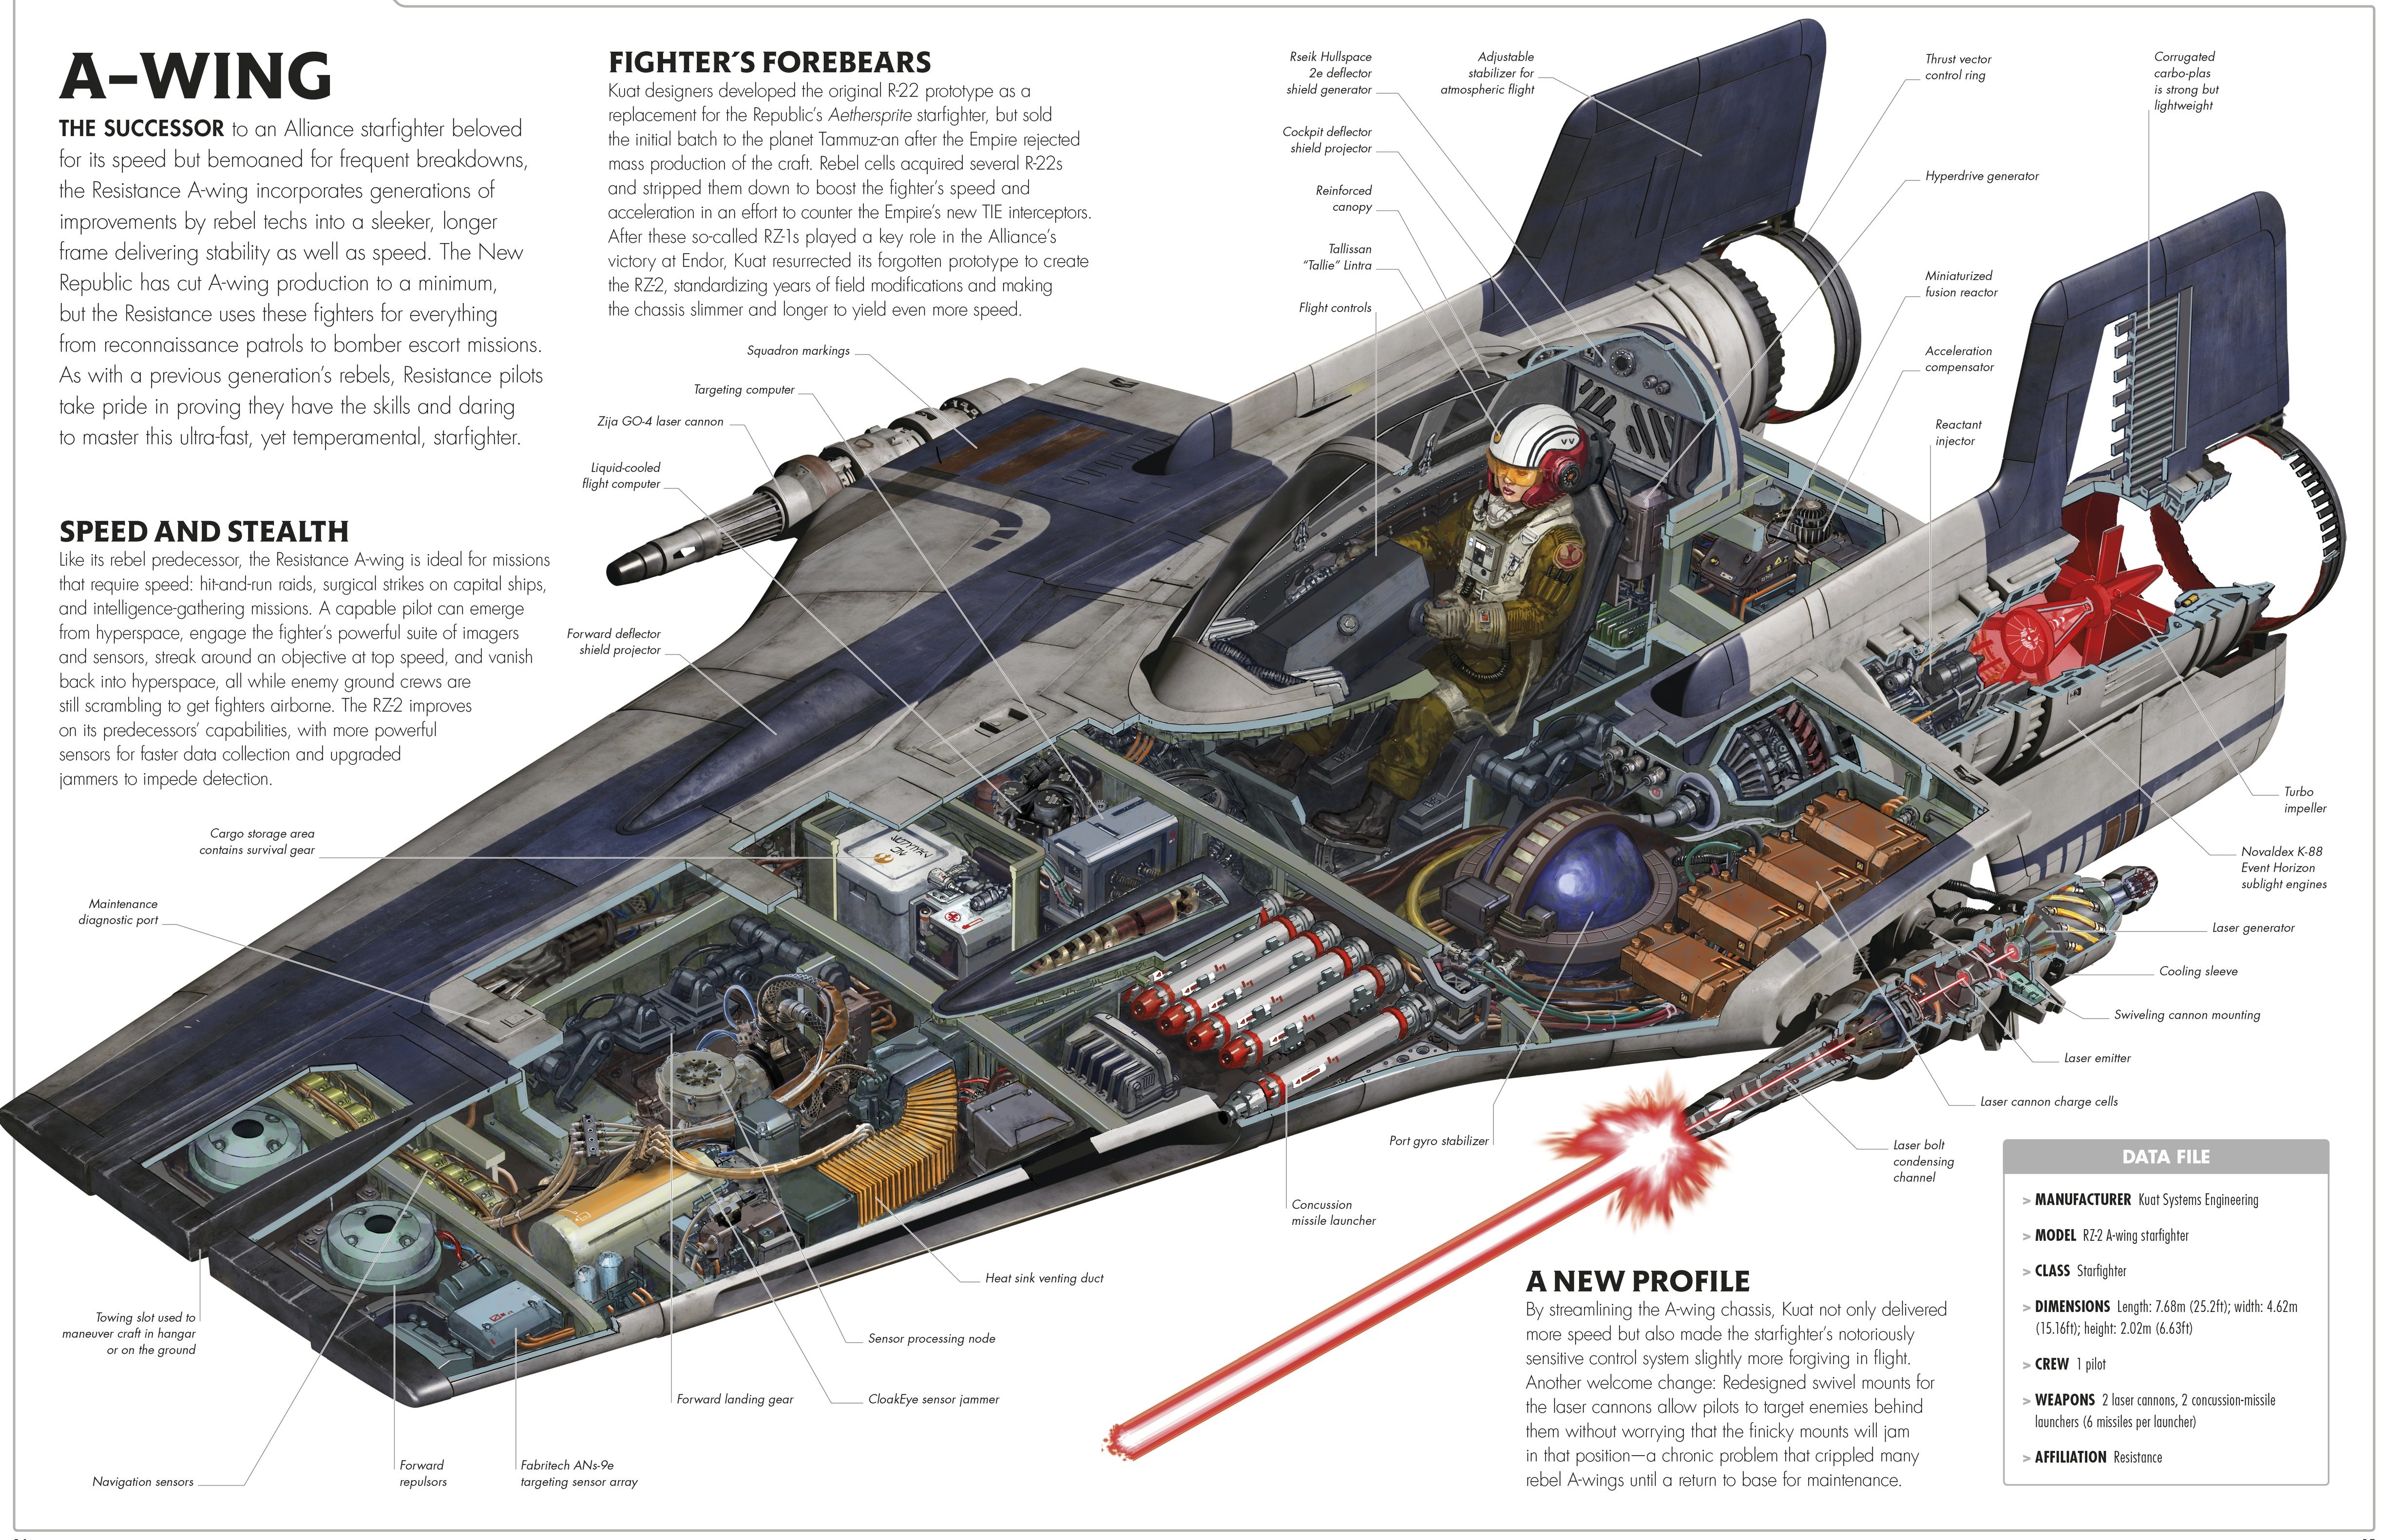 General 4897x3161 Star Wars A-Wing infographics spaceship Star Wars Ships cross section cutaway Rebel Alliance